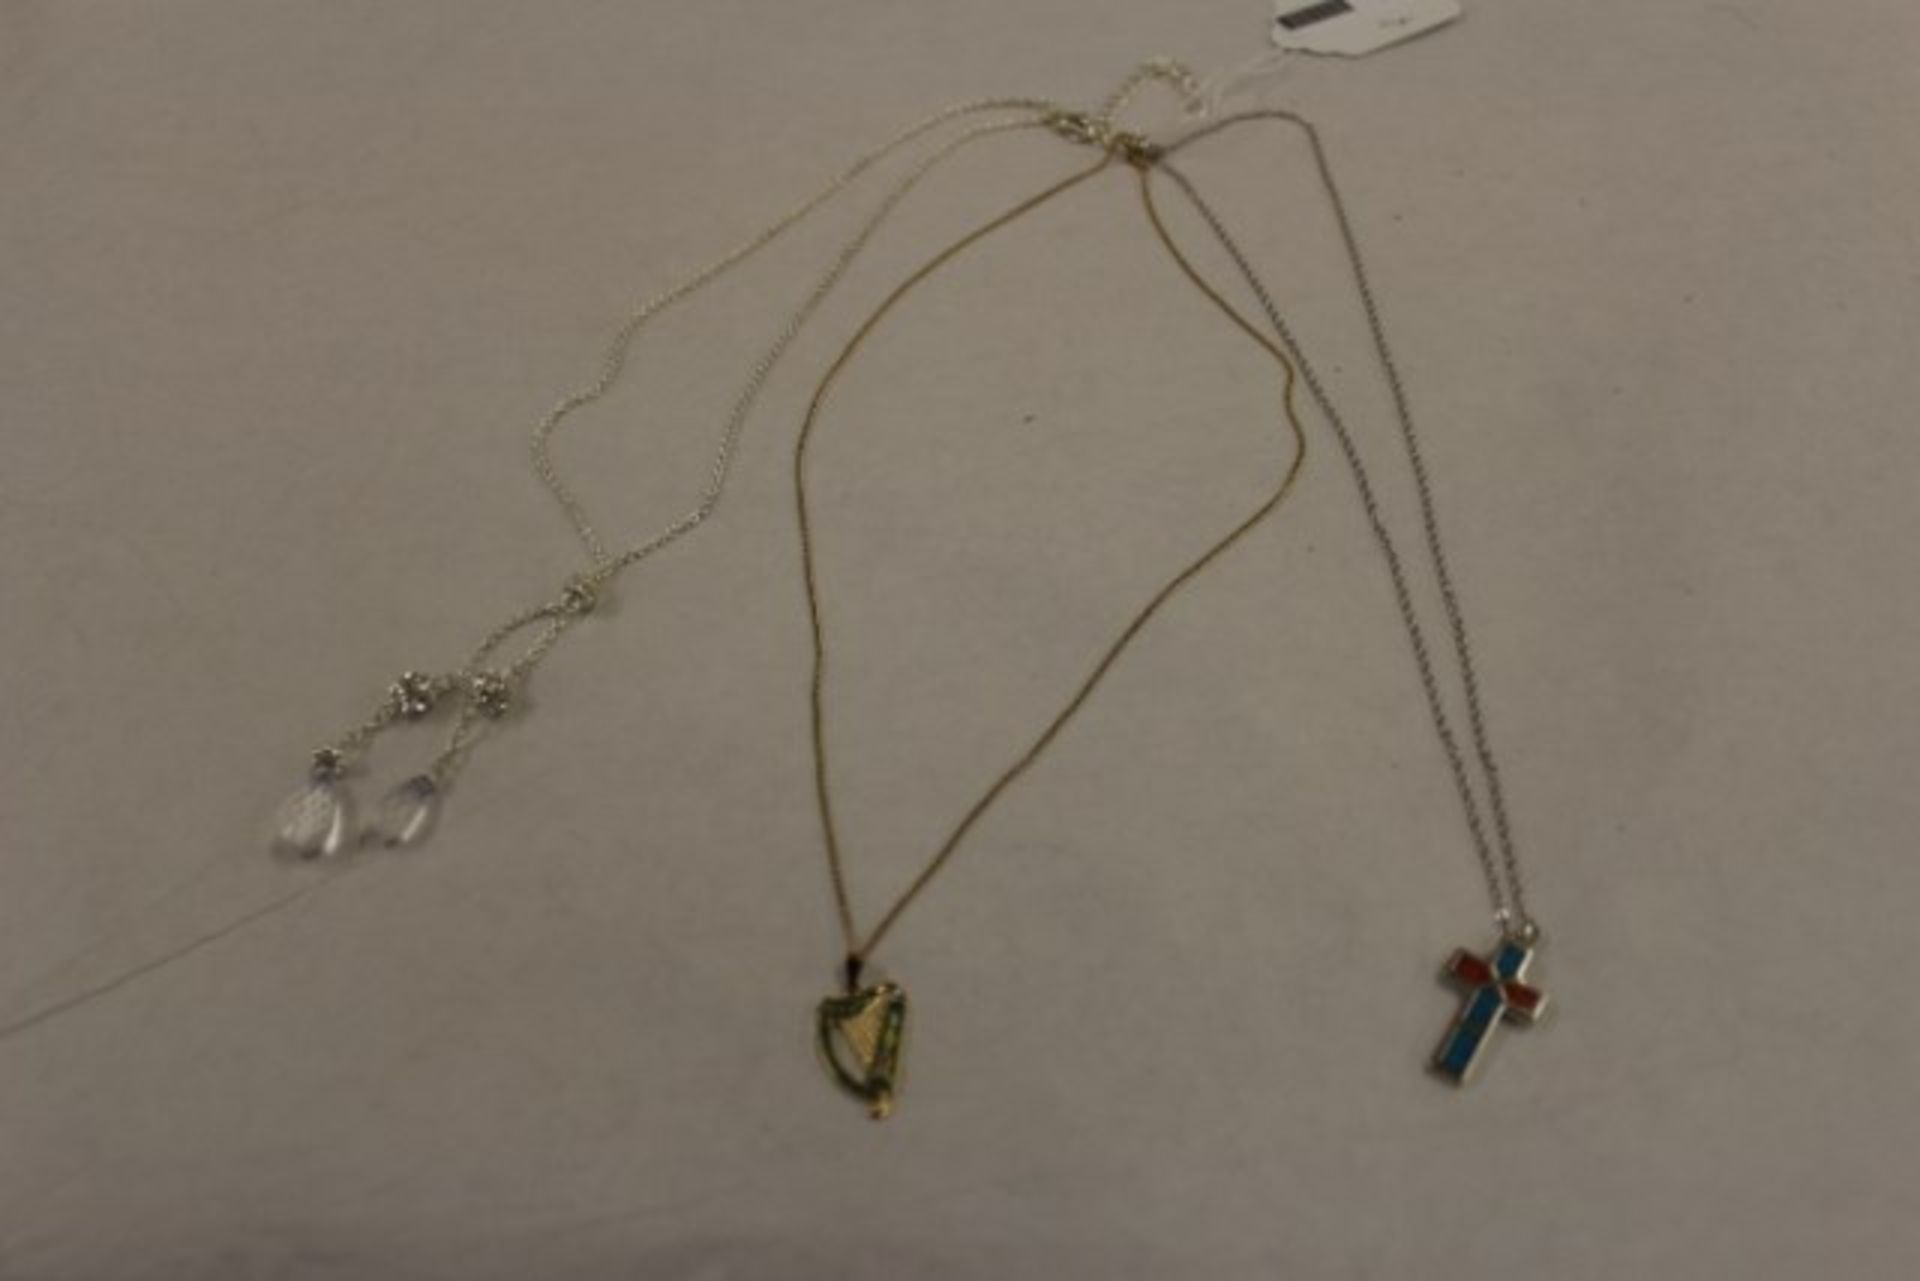 Two Wm & One YM Necklaces & Pendants